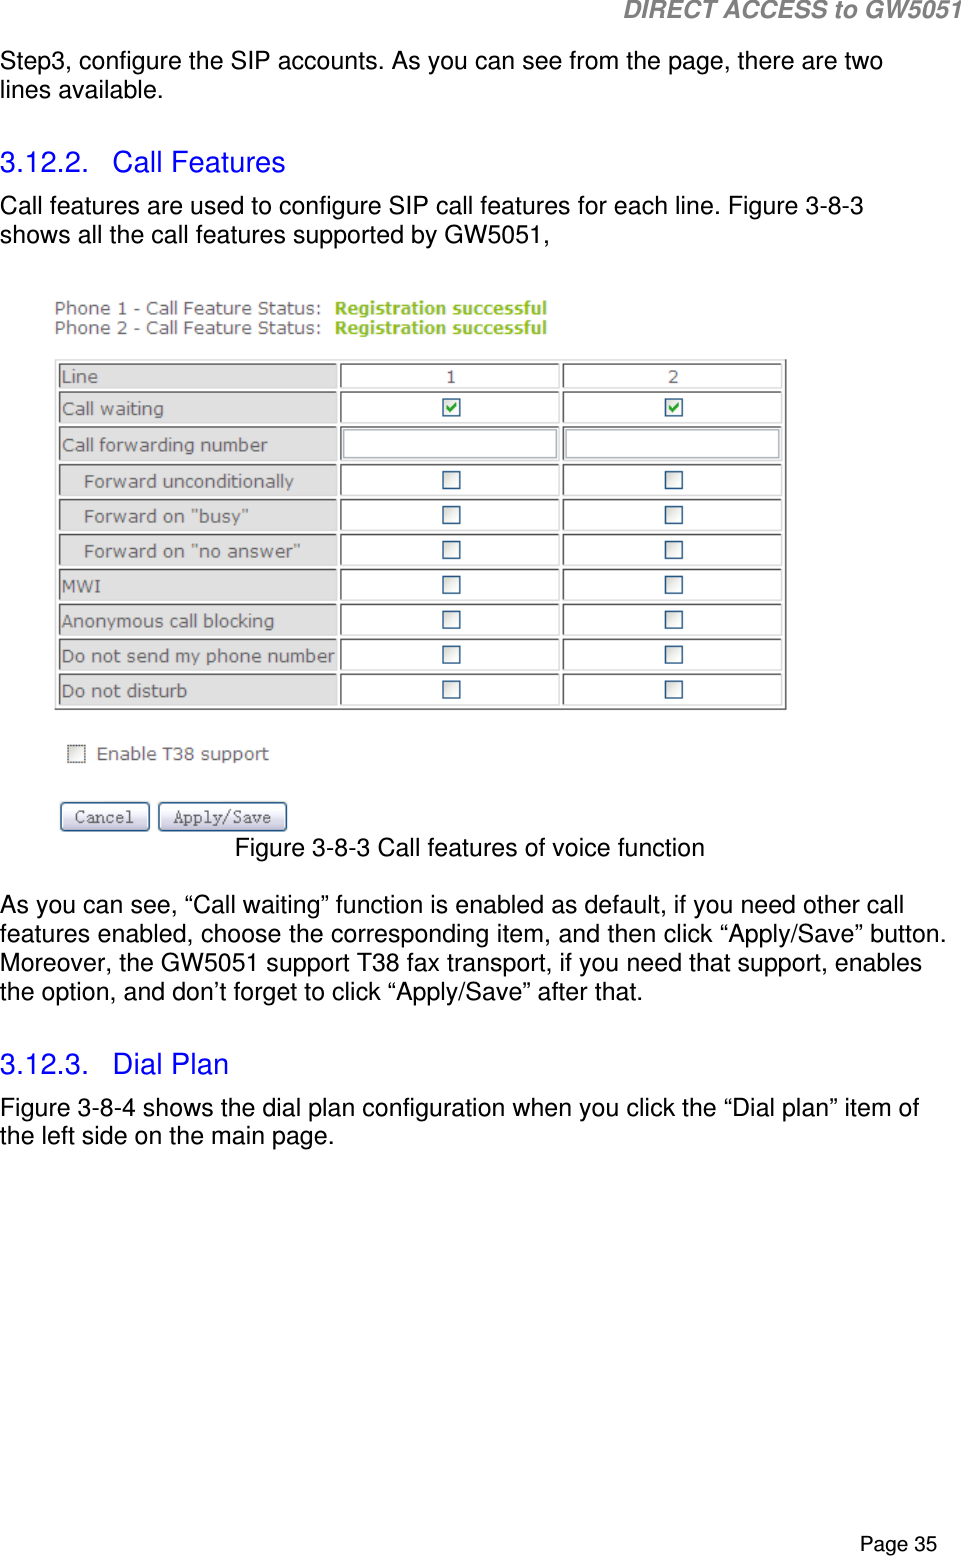                                                                                                                                                                                                                           DIRECT ACCESS to GW5051    Page 35 Step3, configure the SIP accounts. As you can see from the page, there are two lines available.  3.12.2.  Call Features Call features are used to configure SIP call features for each line. Figure 3-8-3 shows all the call features supported by GW5051,   Figure 3-8-3 Call features of voice function  As you can see, “Call waiting” function is enabled as default, if you need other call features enabled, choose the corresponding item, and then click “Apply/Save” button.  Moreover, the GW5051 support T38 fax transport, if you need that support, enables the option, and don’t forget to click “Apply/Save” after that.  3.12.3.  Dial Plan Figure 3-8-4 shows the dial plan configuration when you click the “Dial plan” item of the left side on the main page. 